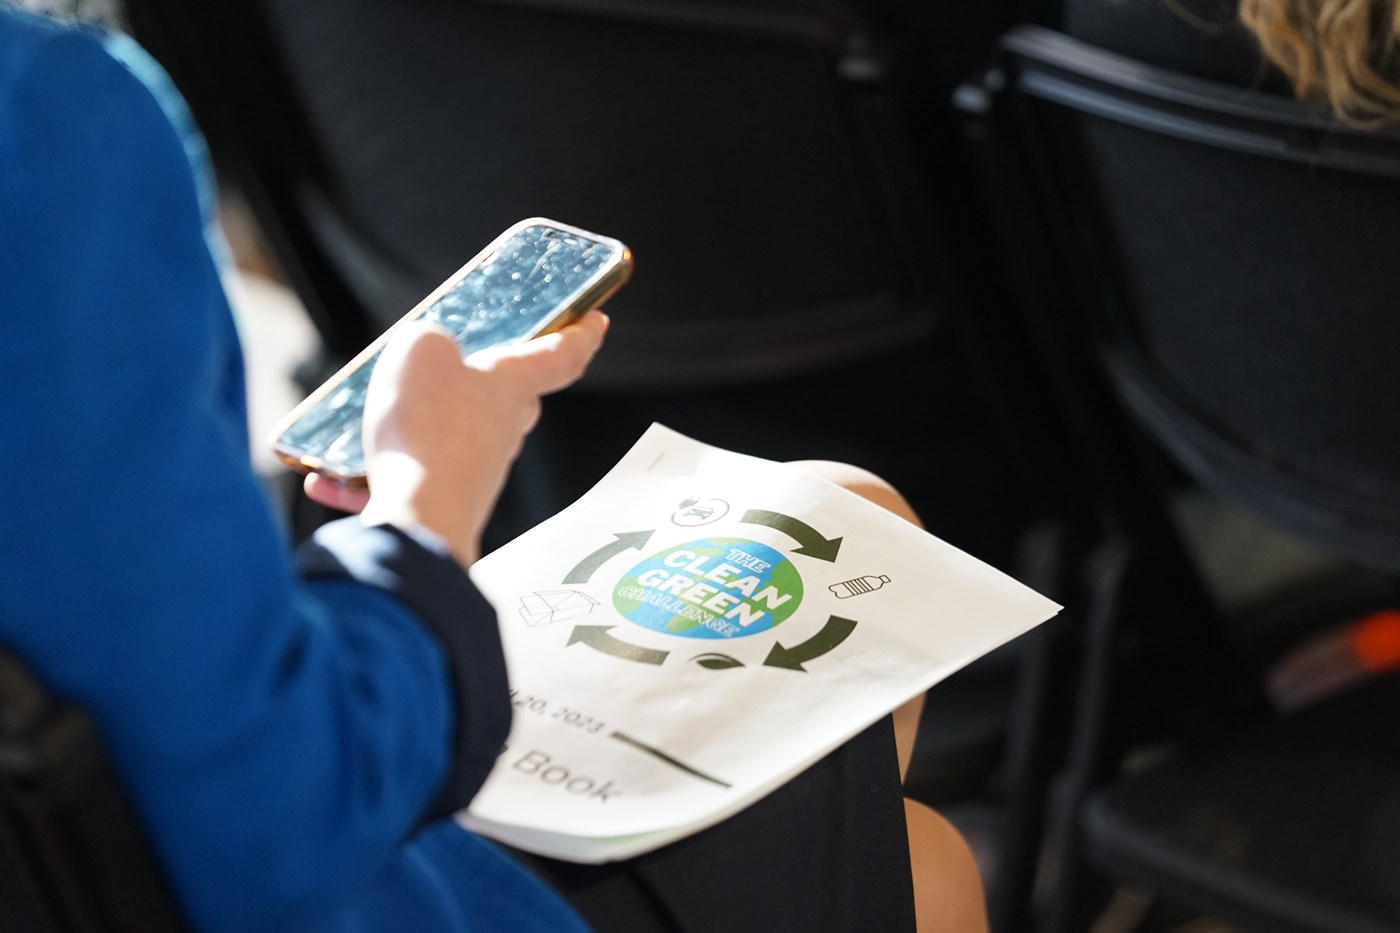 Person looking at phone in hand with flyer on lap